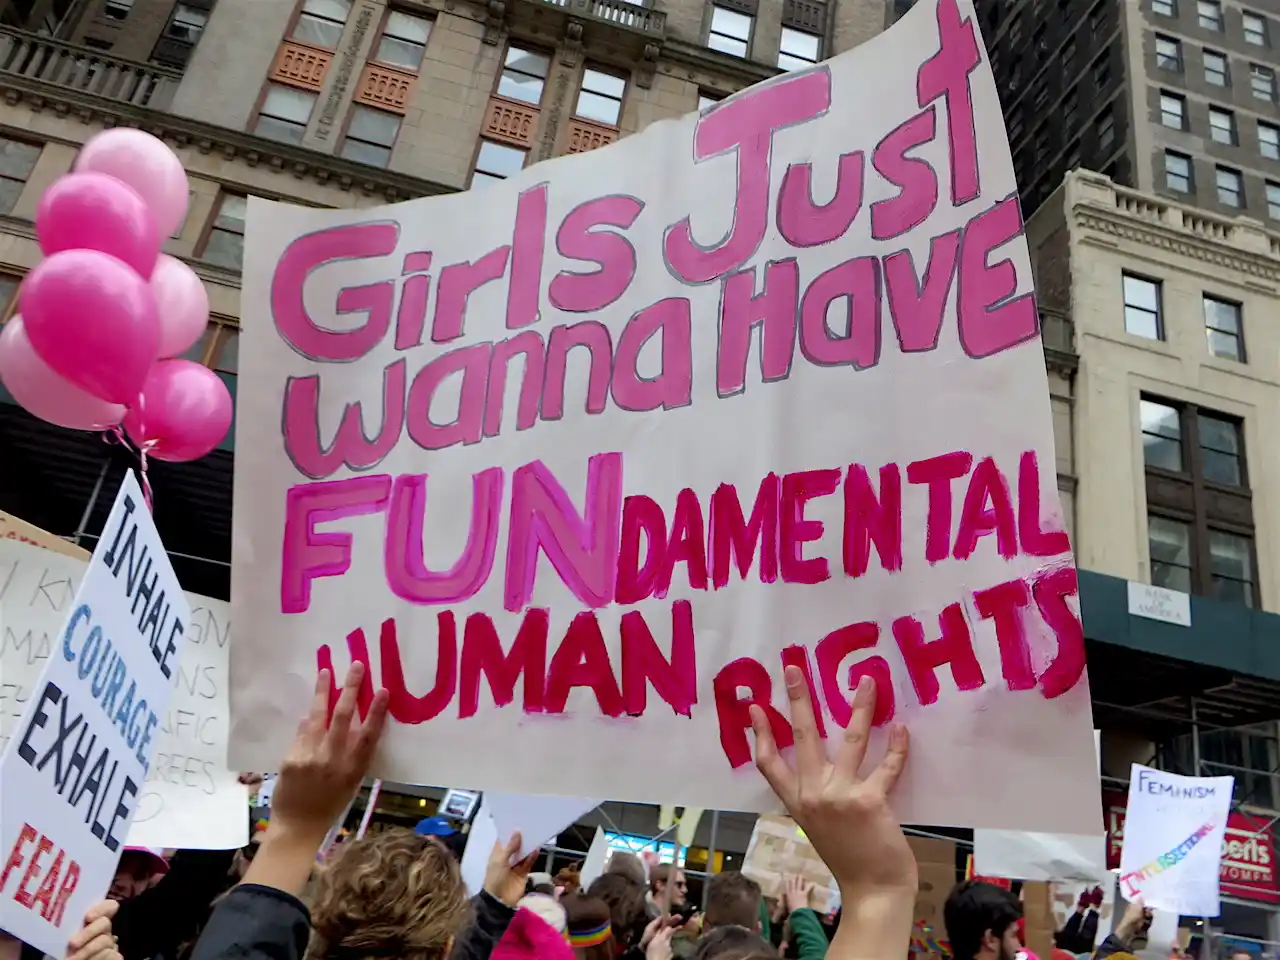 A group of people holding up a sign<br><br>Description automatically generated